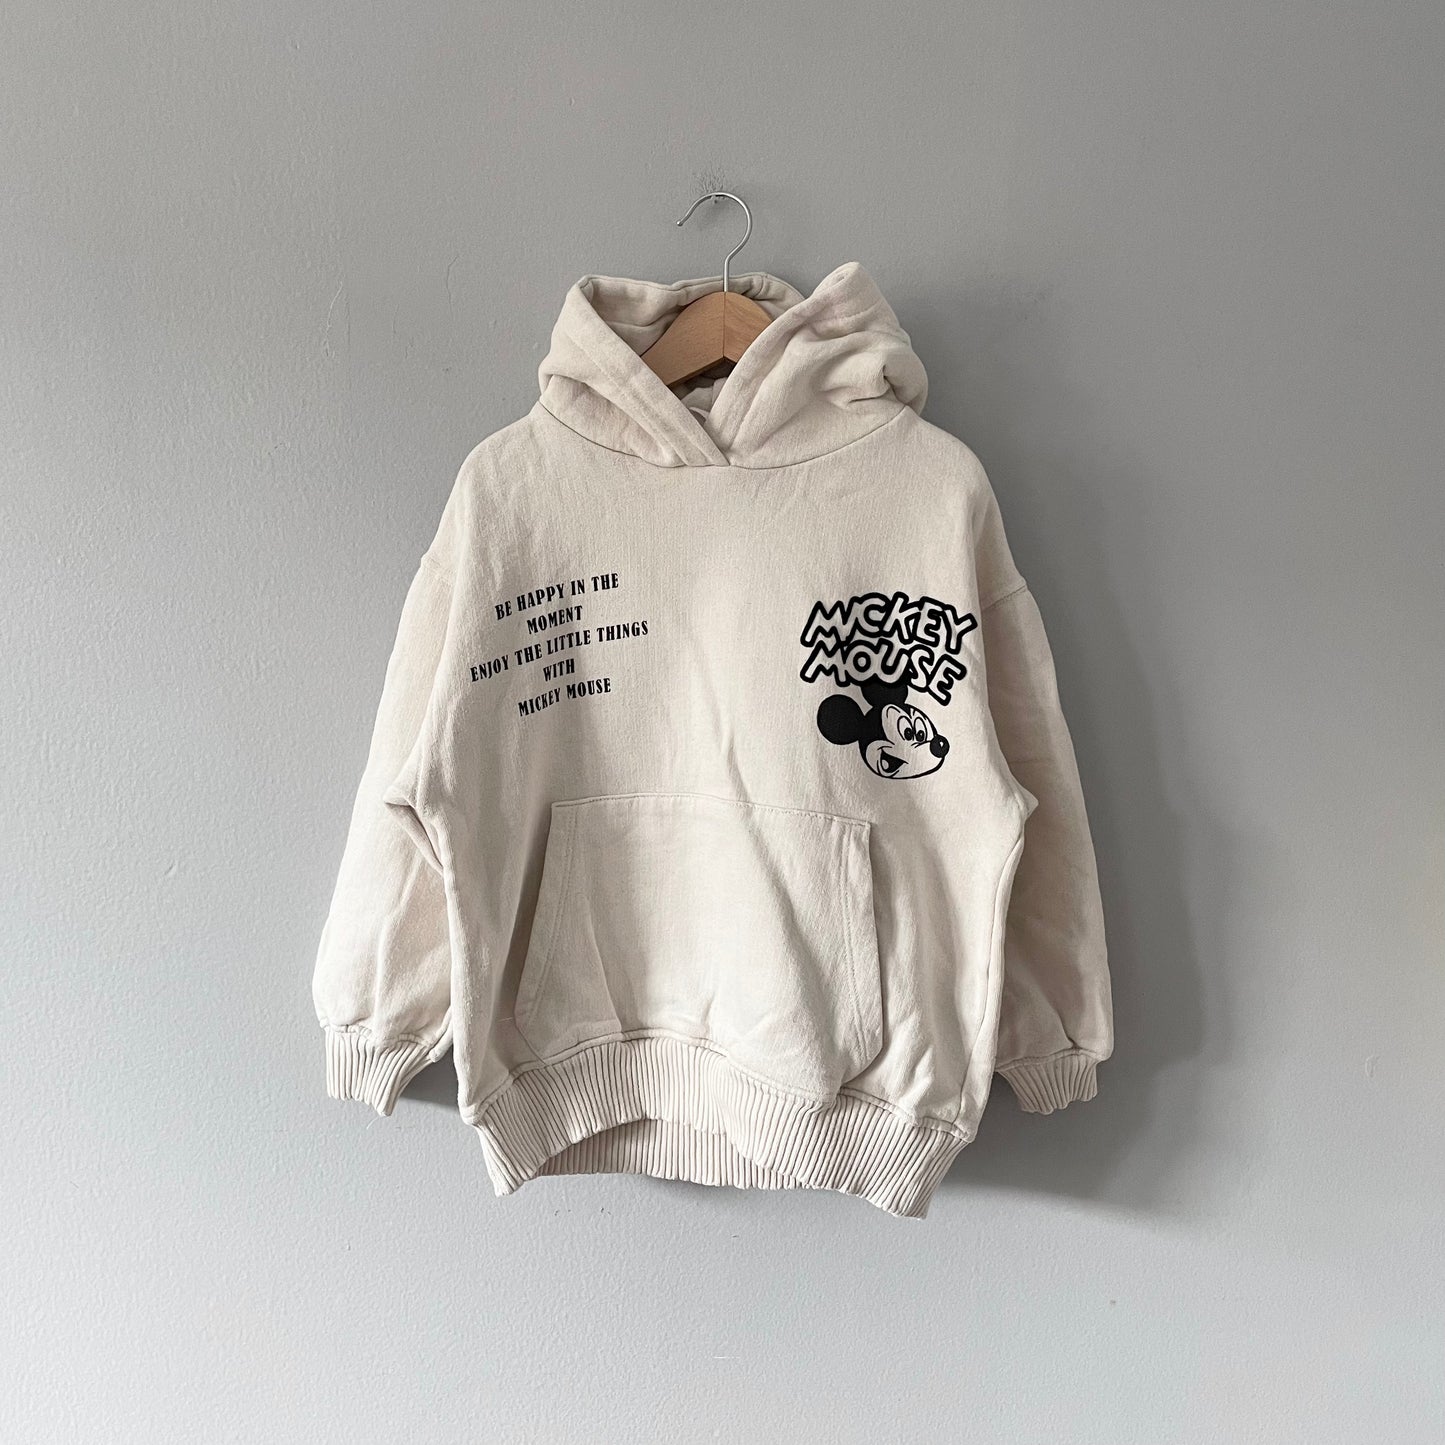 Zara / White Mickey mouse hoodie / 8Y